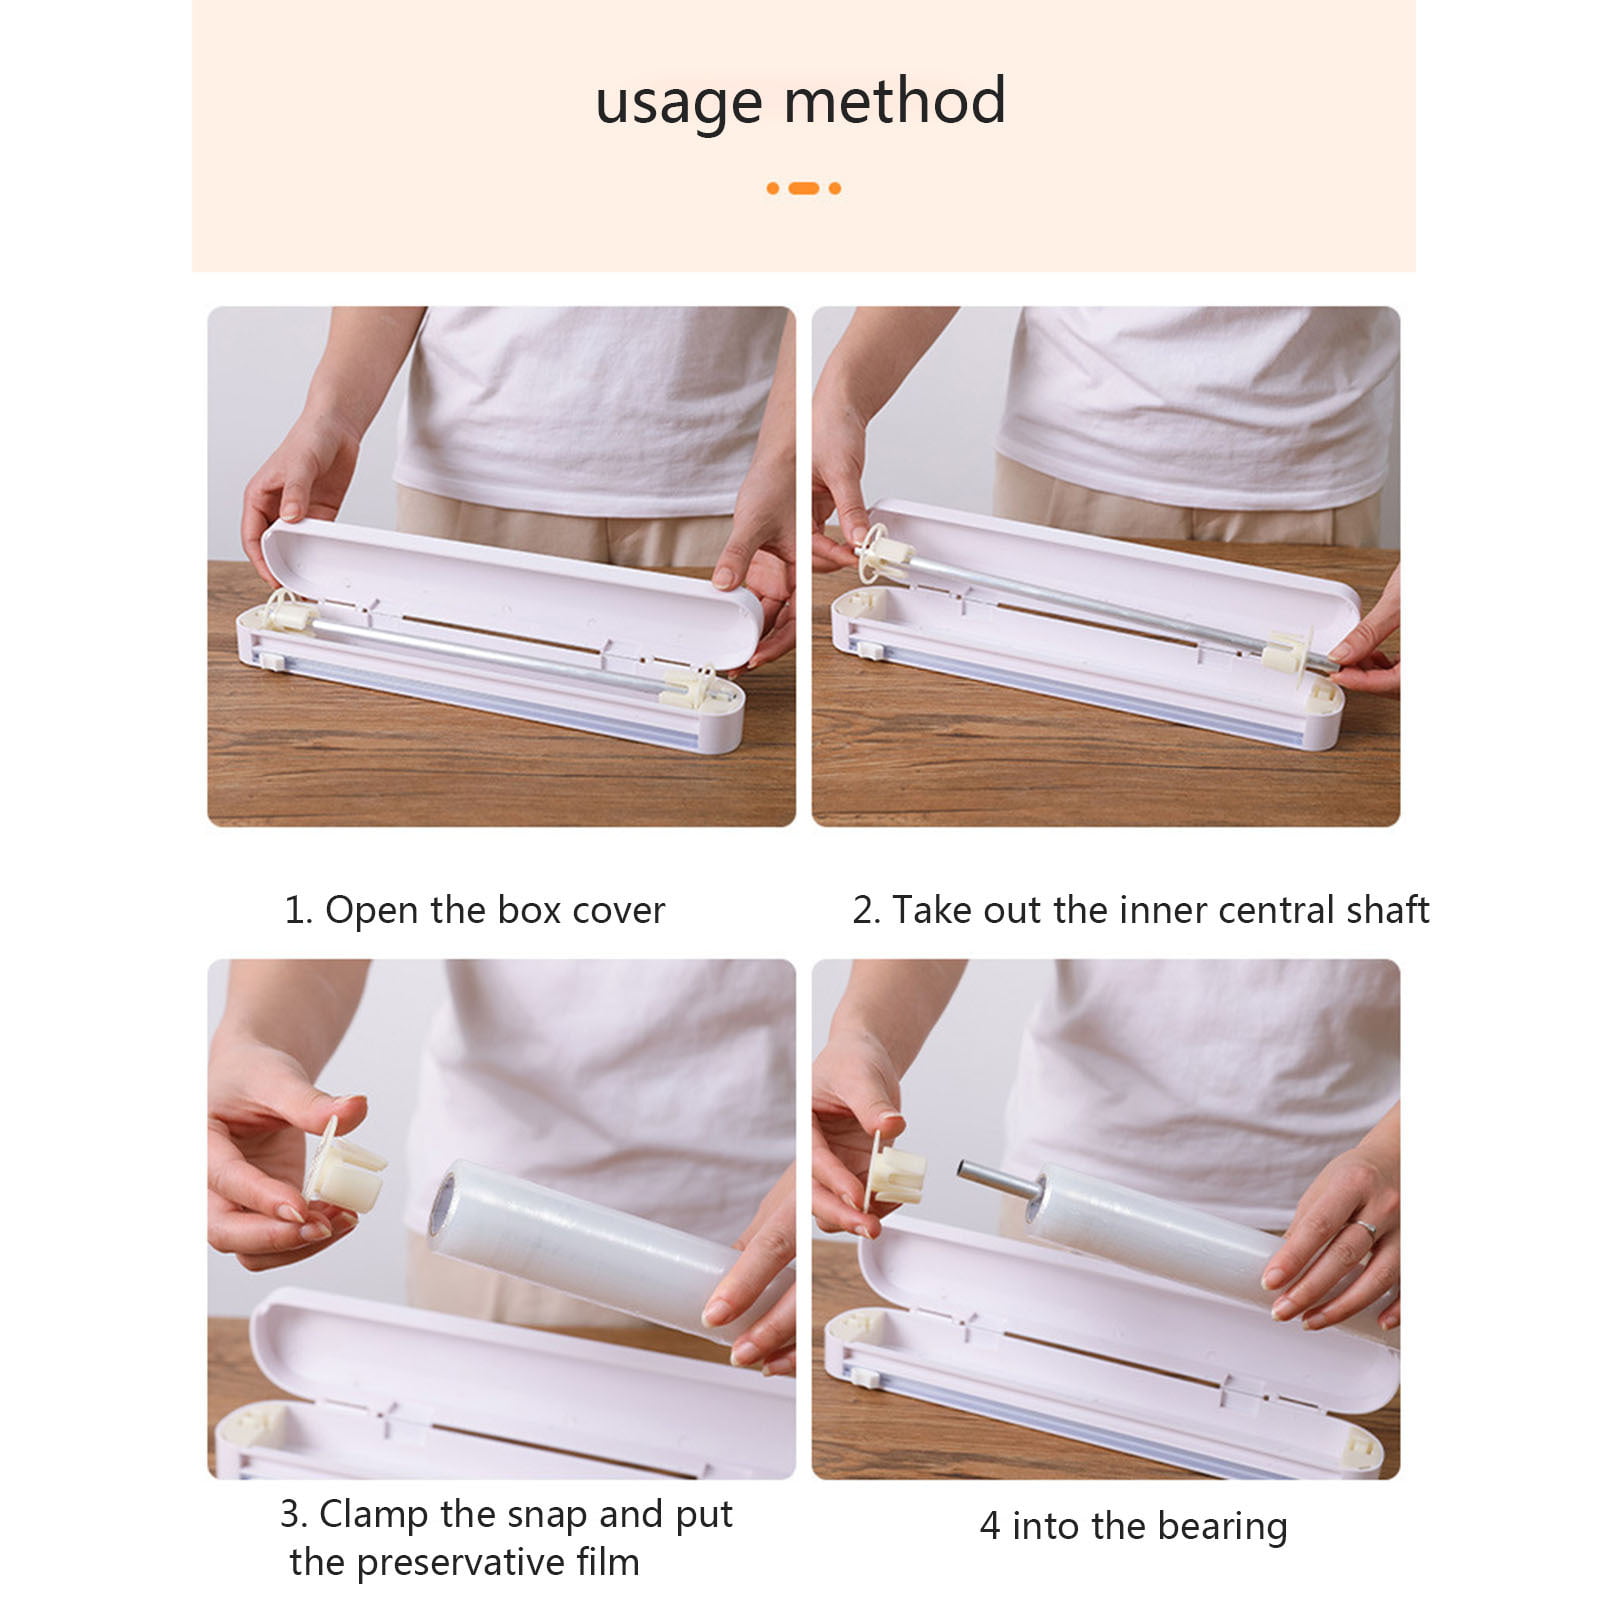 Nuluphu Plastic Cling Wrap Refillable Plastic Wrap Dispenser with Slider Cutter Food Wrap Stretch Clear Cling Wrap 12 Inch650 ft (Cutting Box + Cling film)